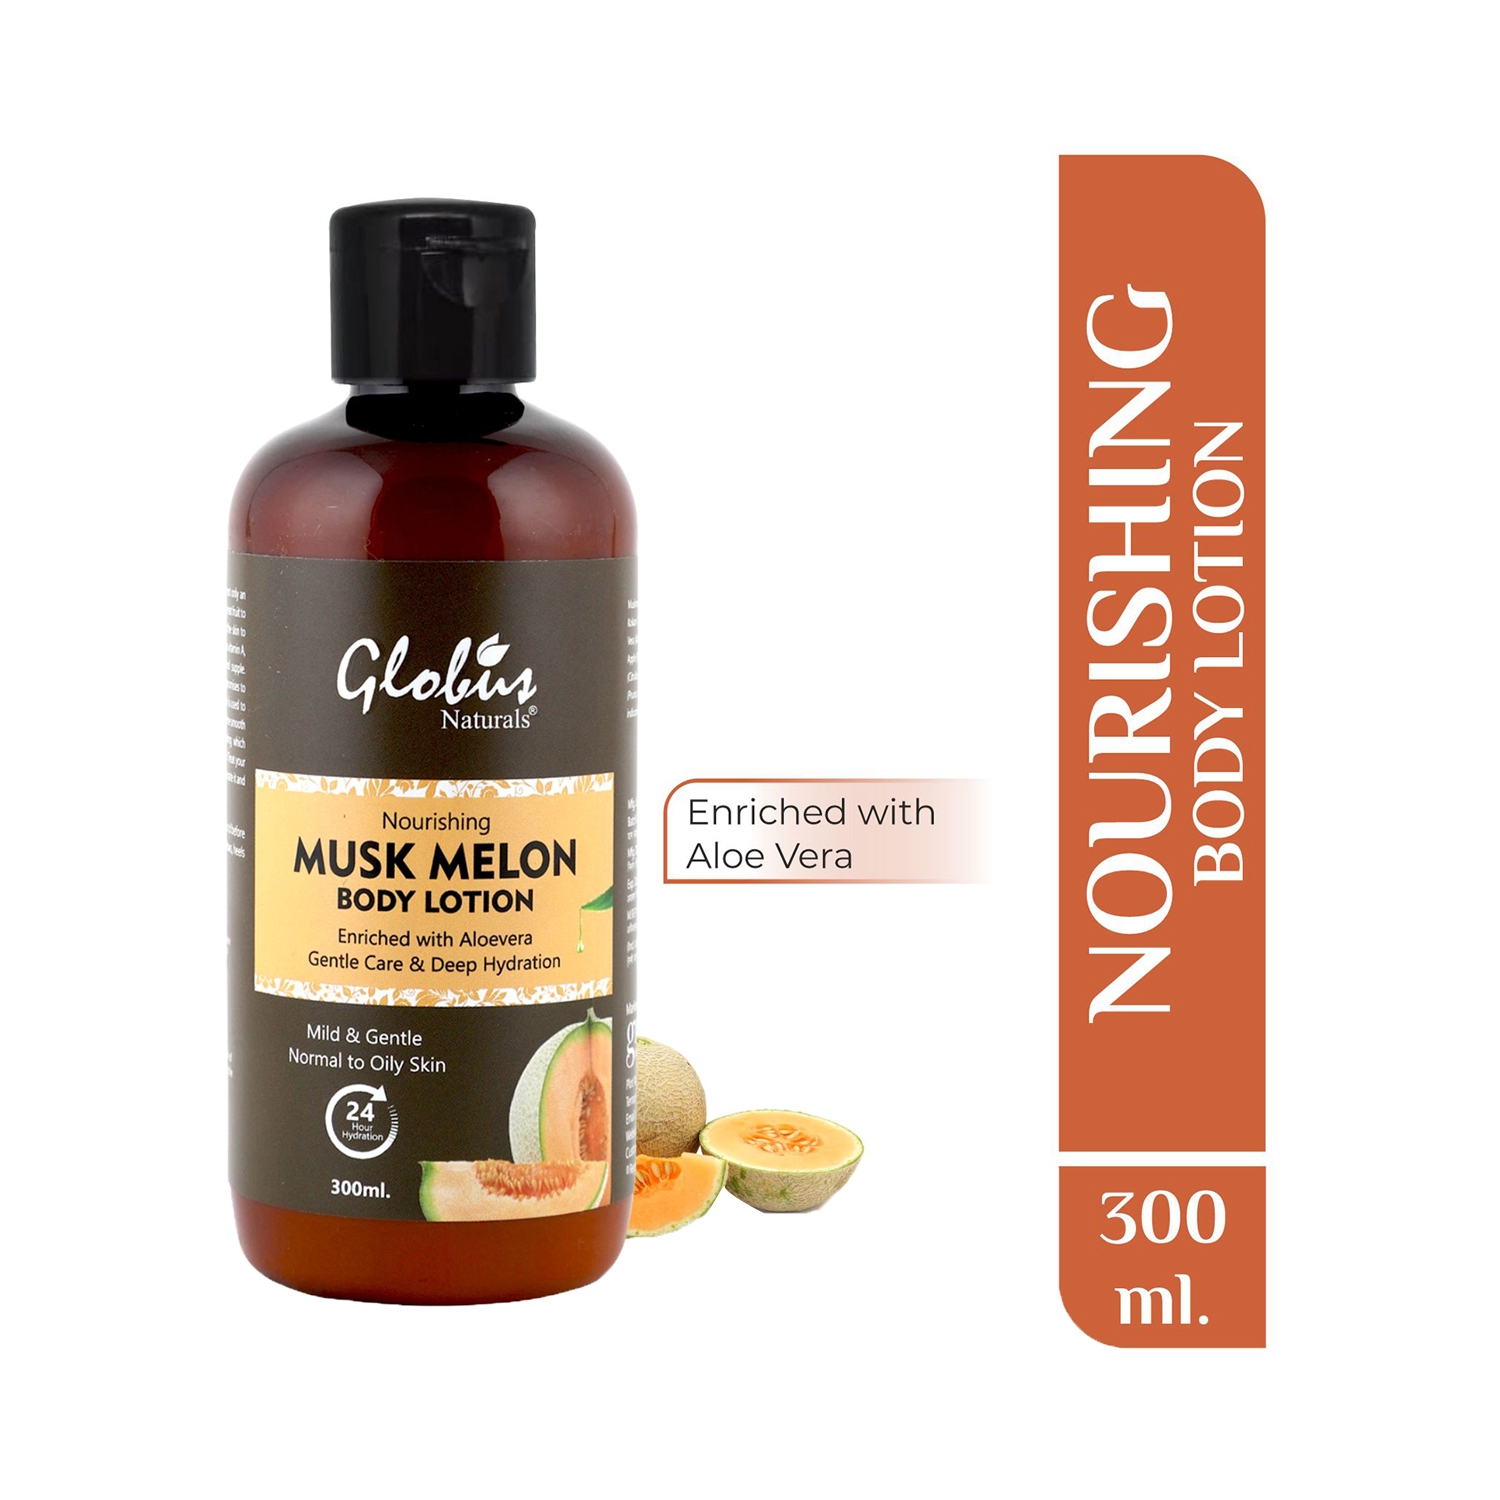 Globus Naturals | Globus Naturals Nourishing Muskmelon Body Lotion Enriched With Aloe Vera Gentle Care & Deep Hydration (300ml)